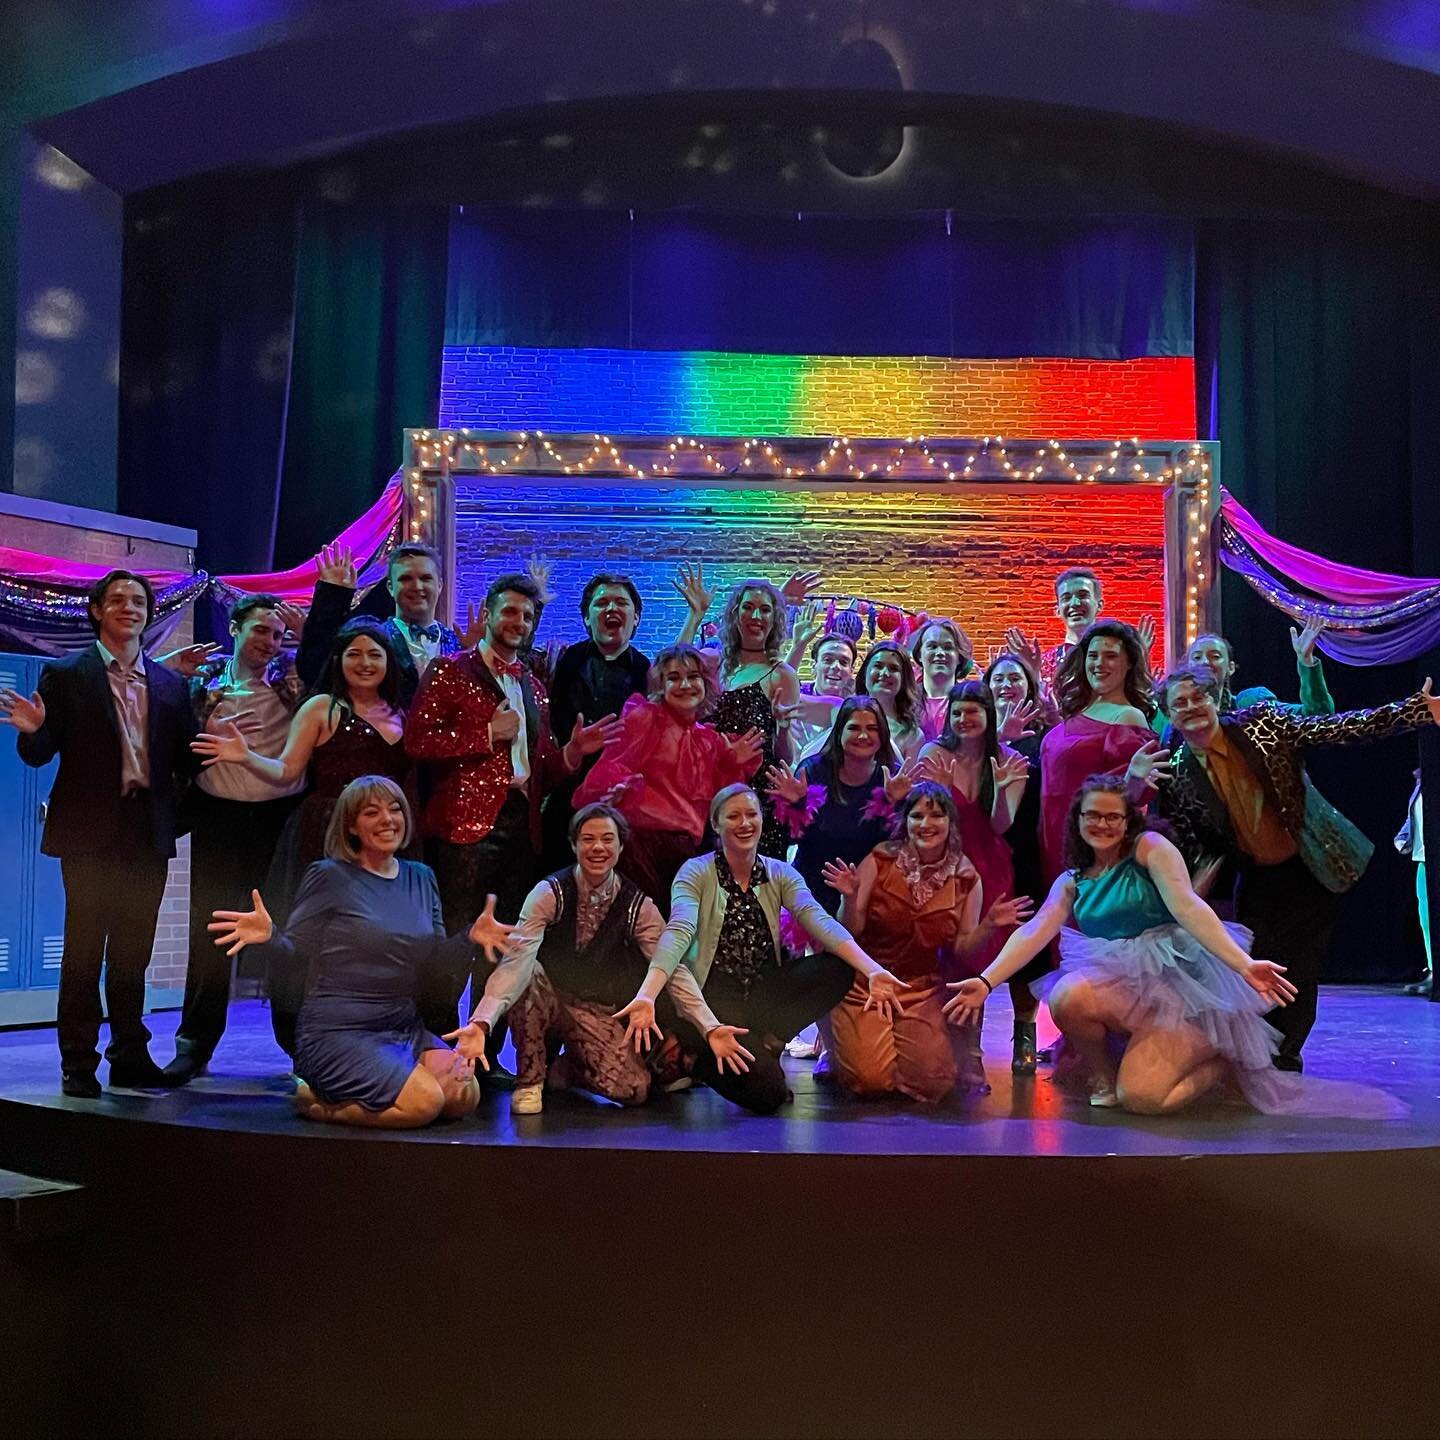 Congratulations to the cast and crew of The Prom at the University of Southern Maine on a fantastic Maine premiere!!! 

I was so touched to see this beautiful queer story told in such a loving way. This production made me laugh, cry, and really think